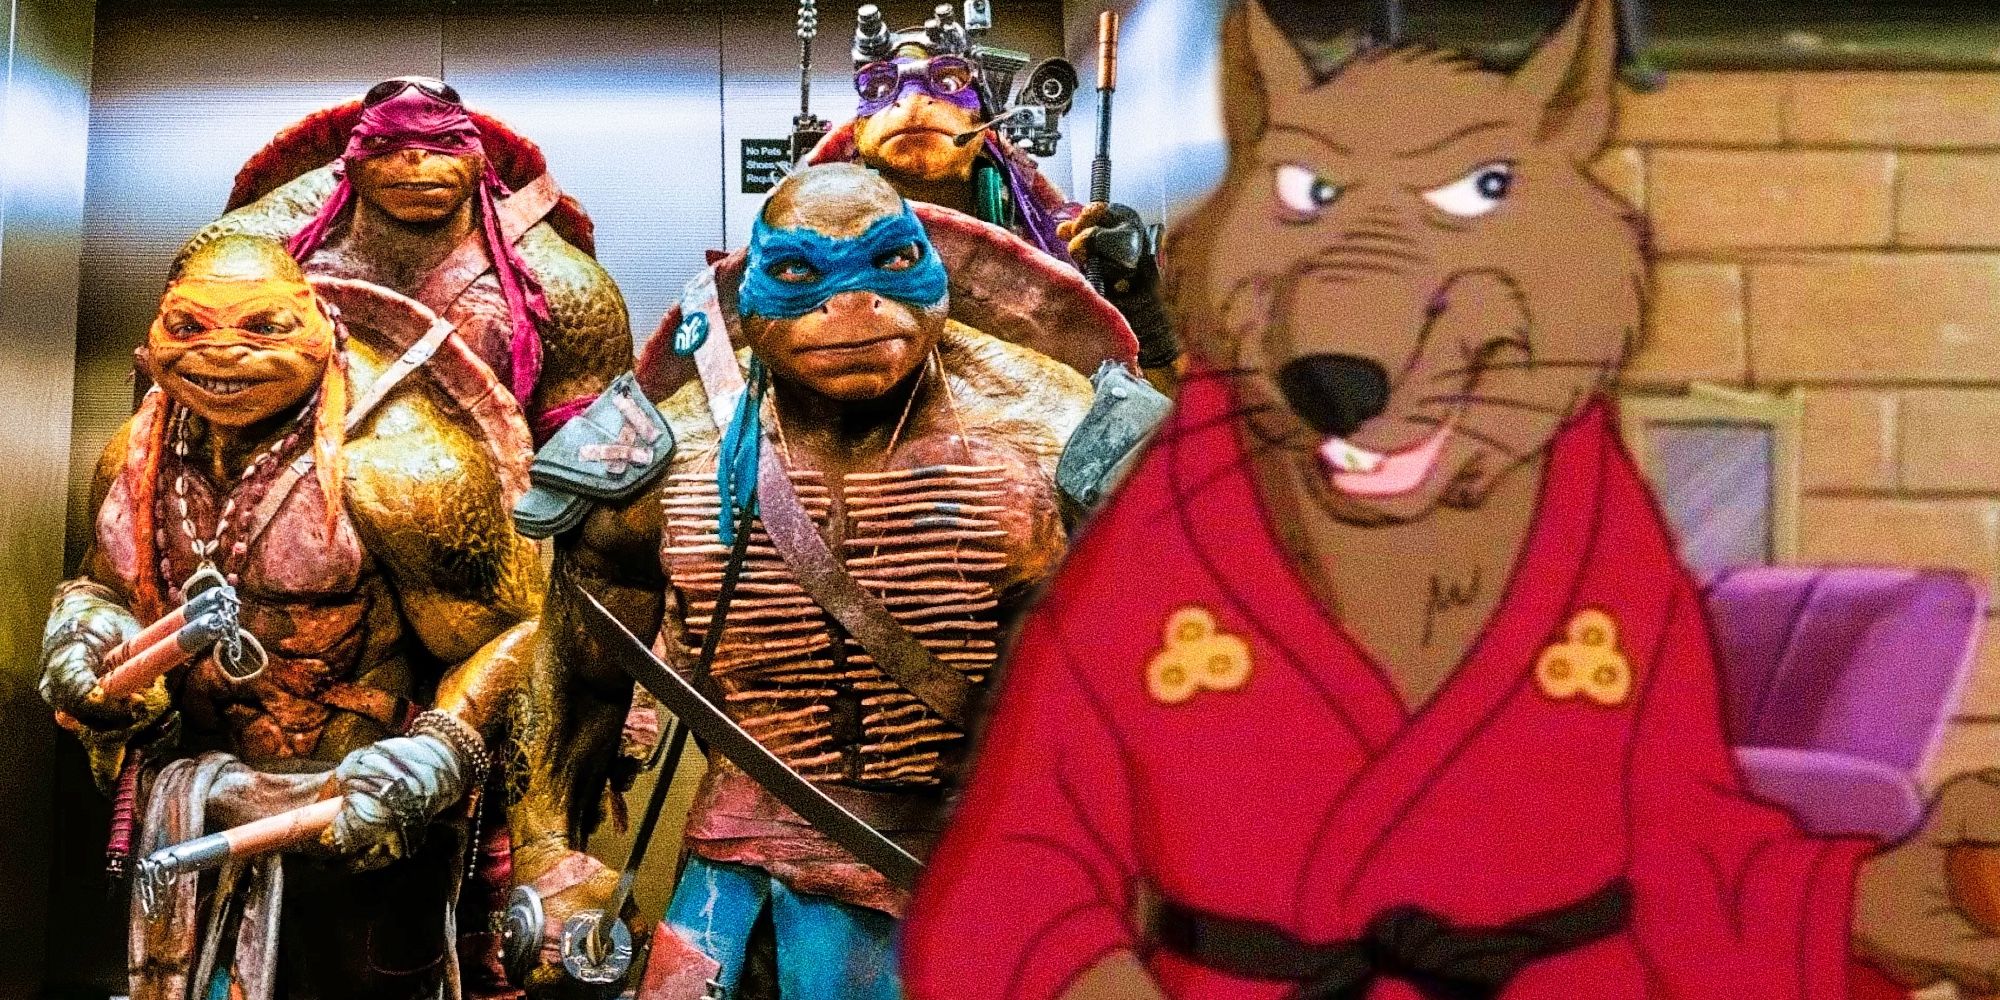 TMNT 2007 All The Loose Ends EXPLAINED! 